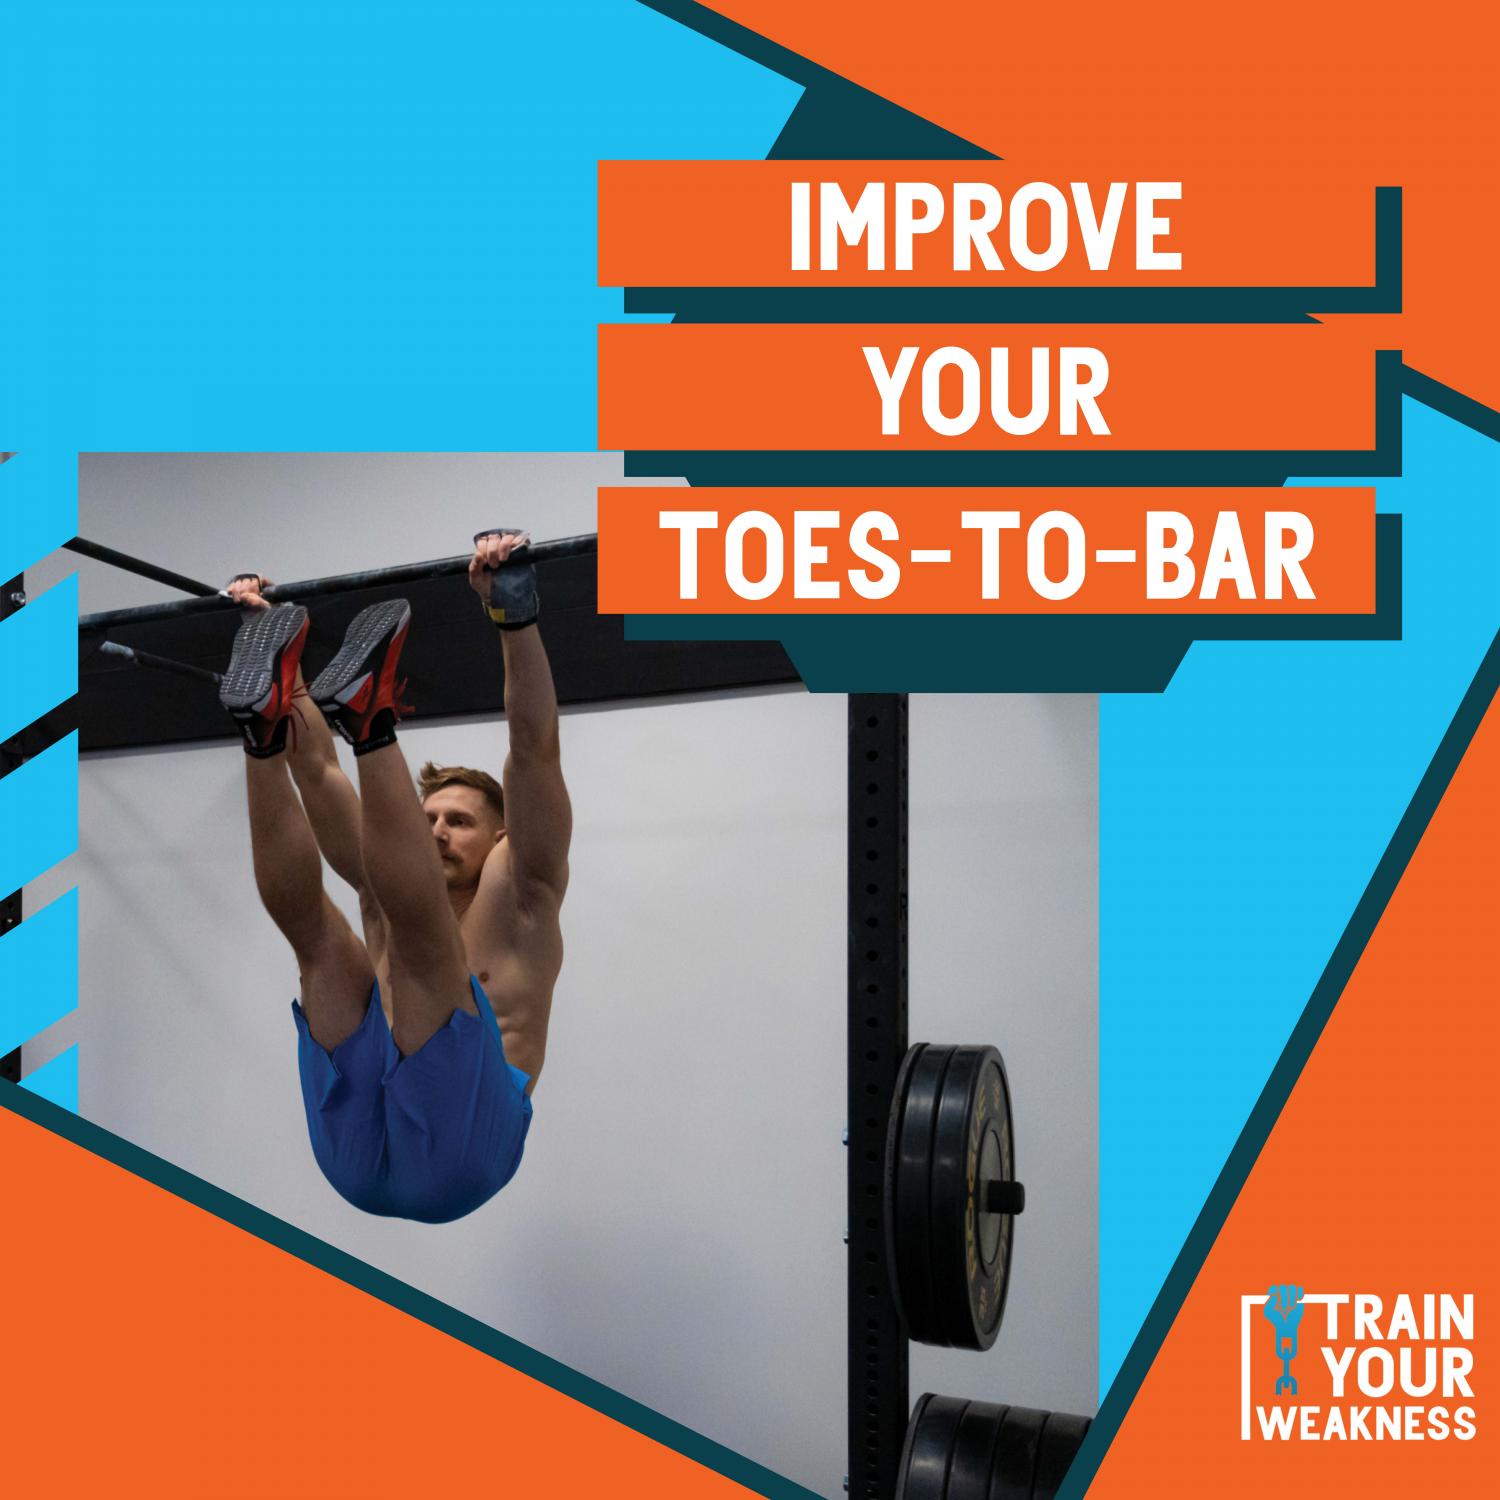 Improve Your Toes-To-Bar